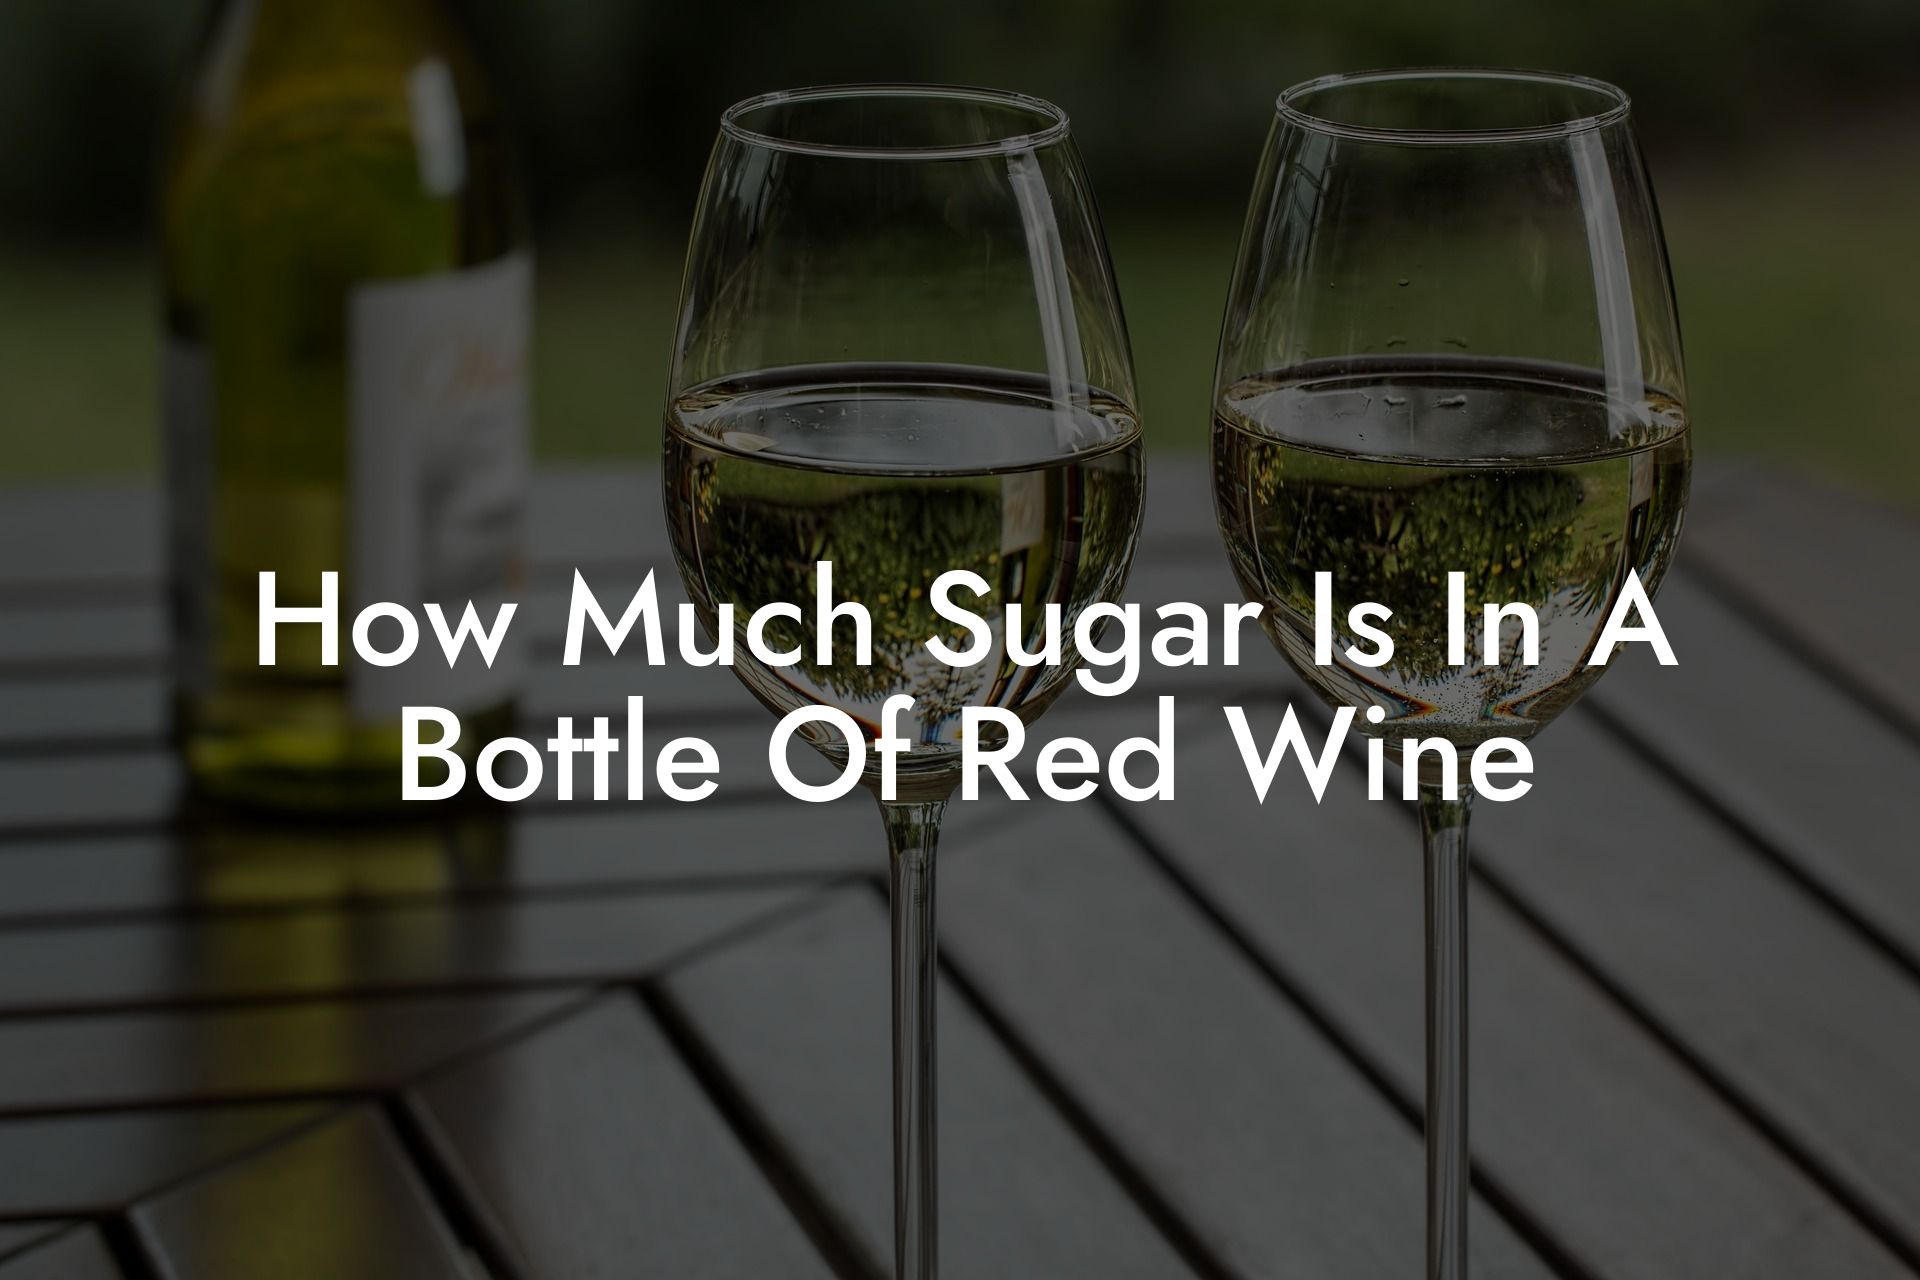 How Much Sugar Is In A Bottle Of Red Wine